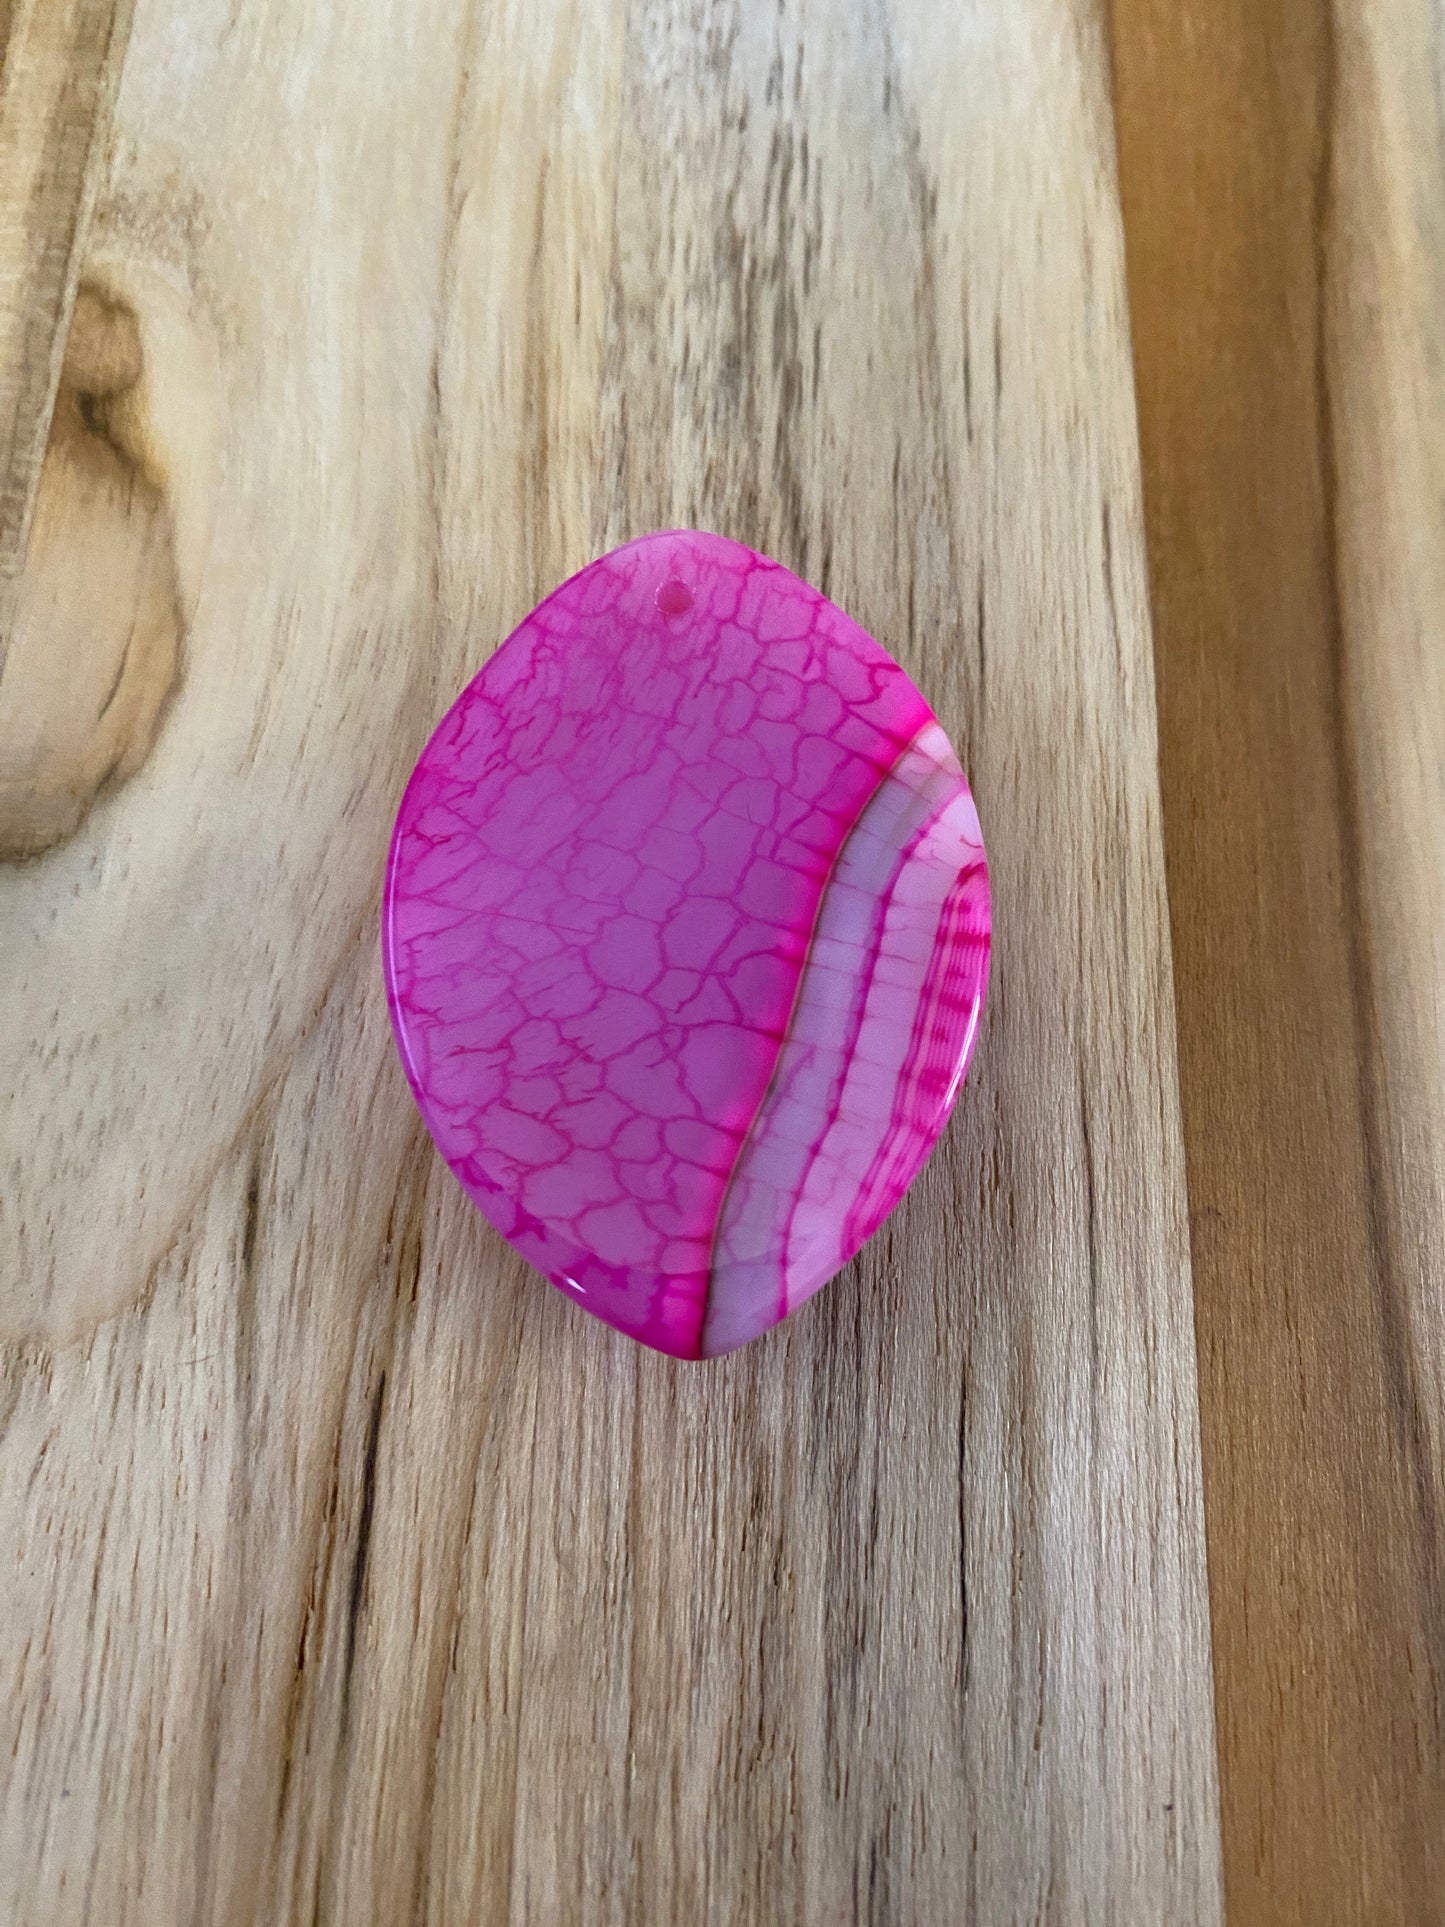 Marquis Shaped Agate Pendant Bead Pink